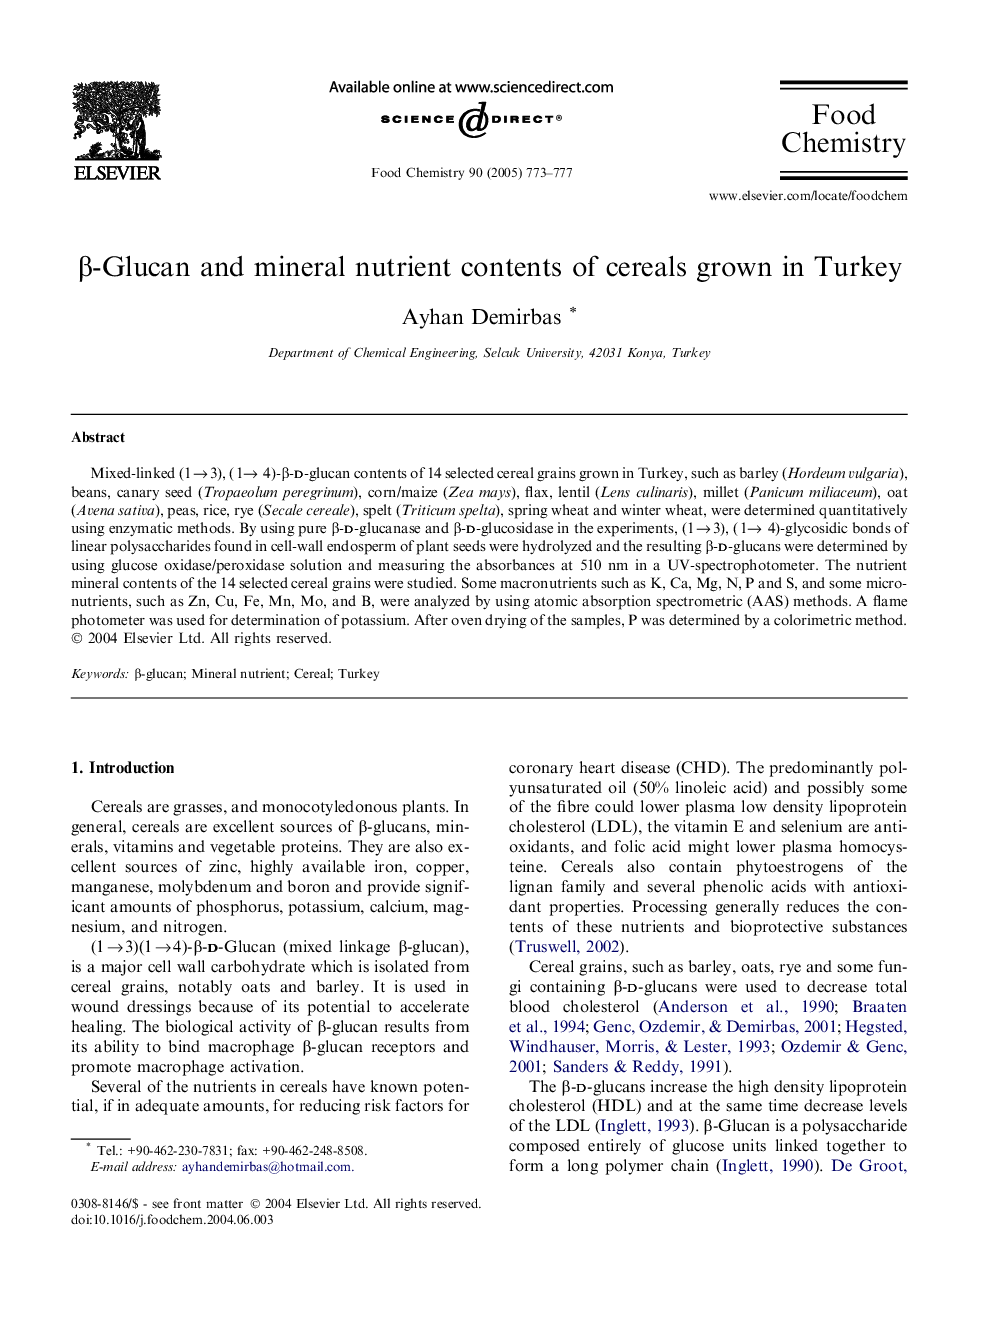 Î²-Glucan and mineral nutrient contents of cereals grown in Turkey